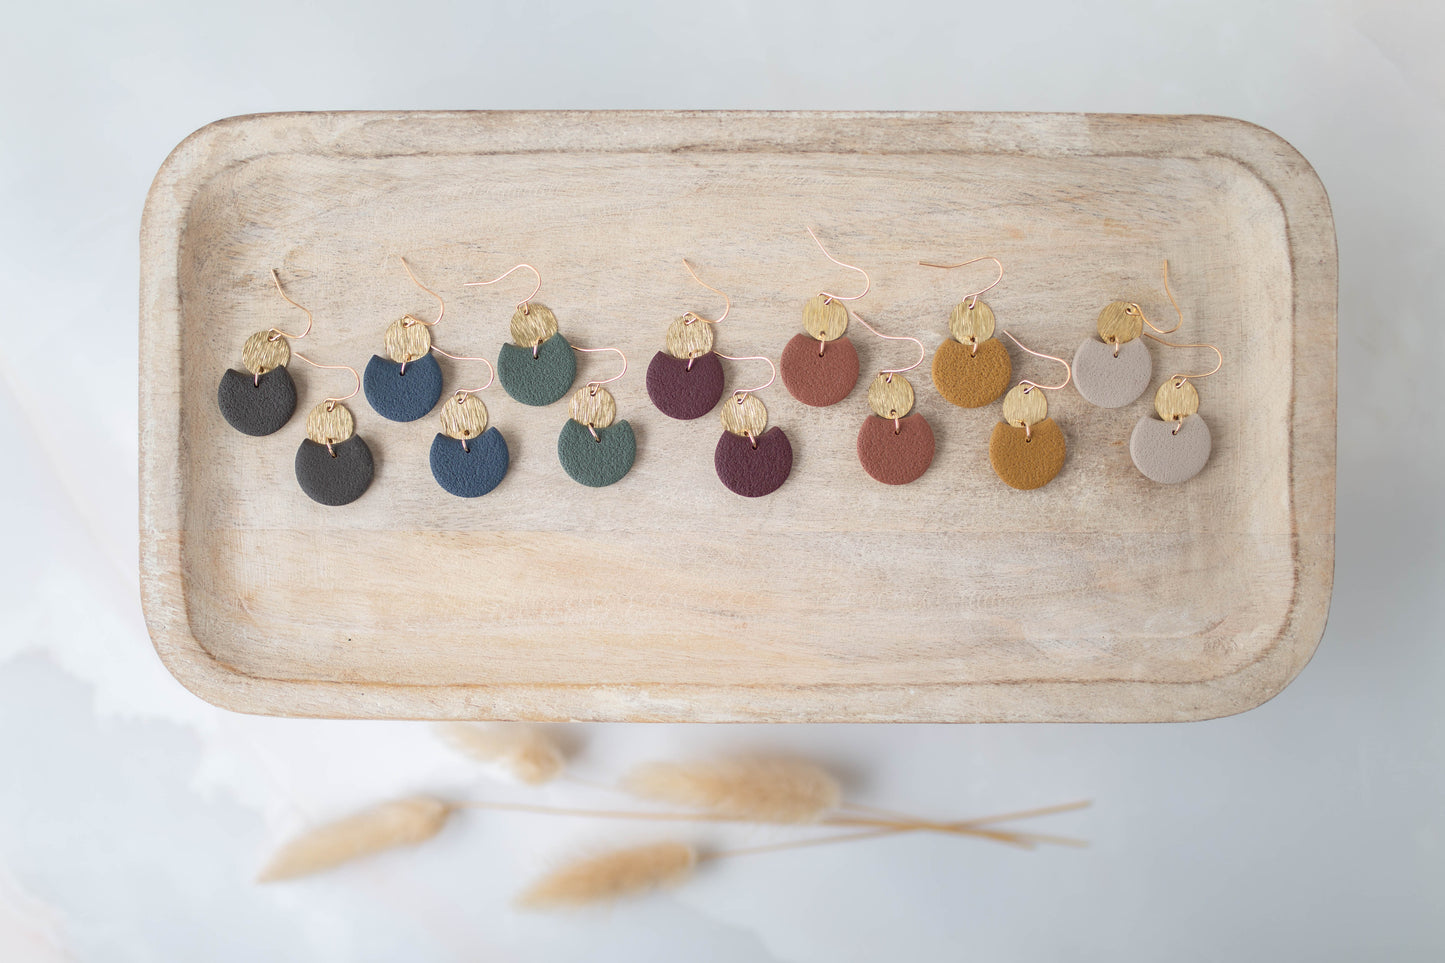 Clay Earrings | Mini Cut-Out Circle Dangles | All Things Fall Collection